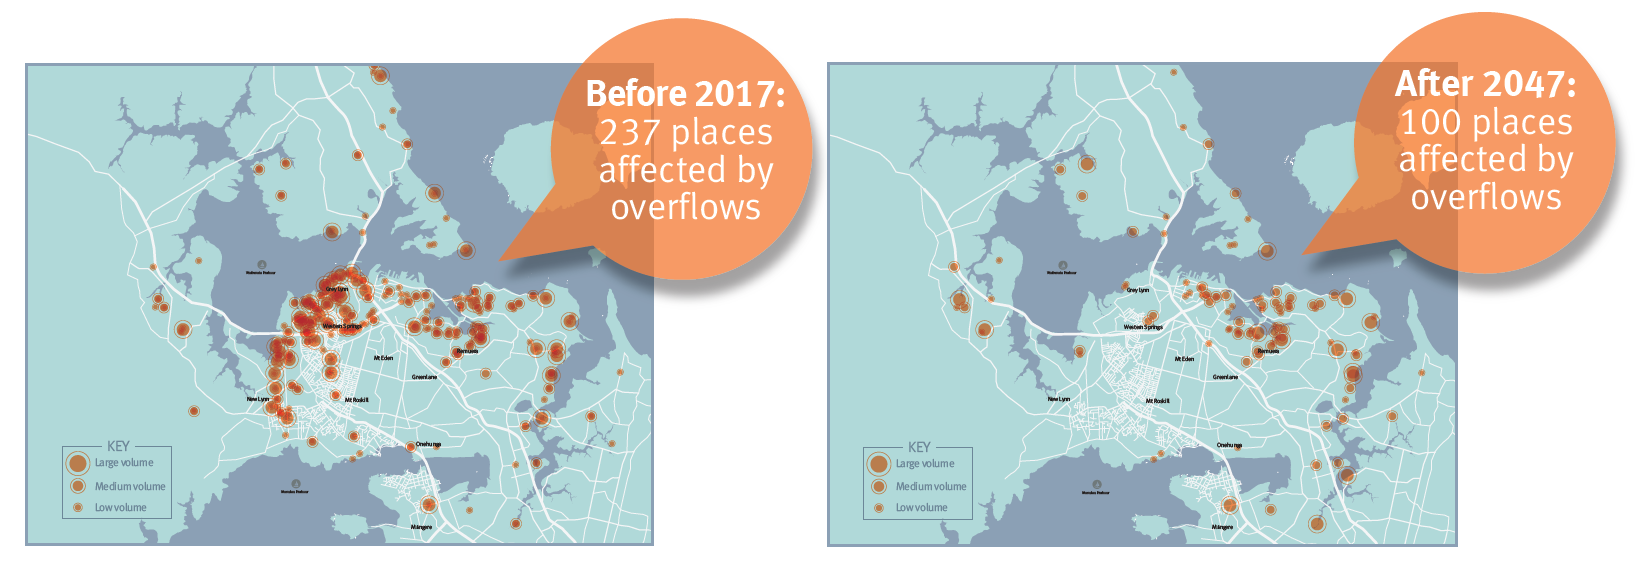 Overflows before and after the strategy